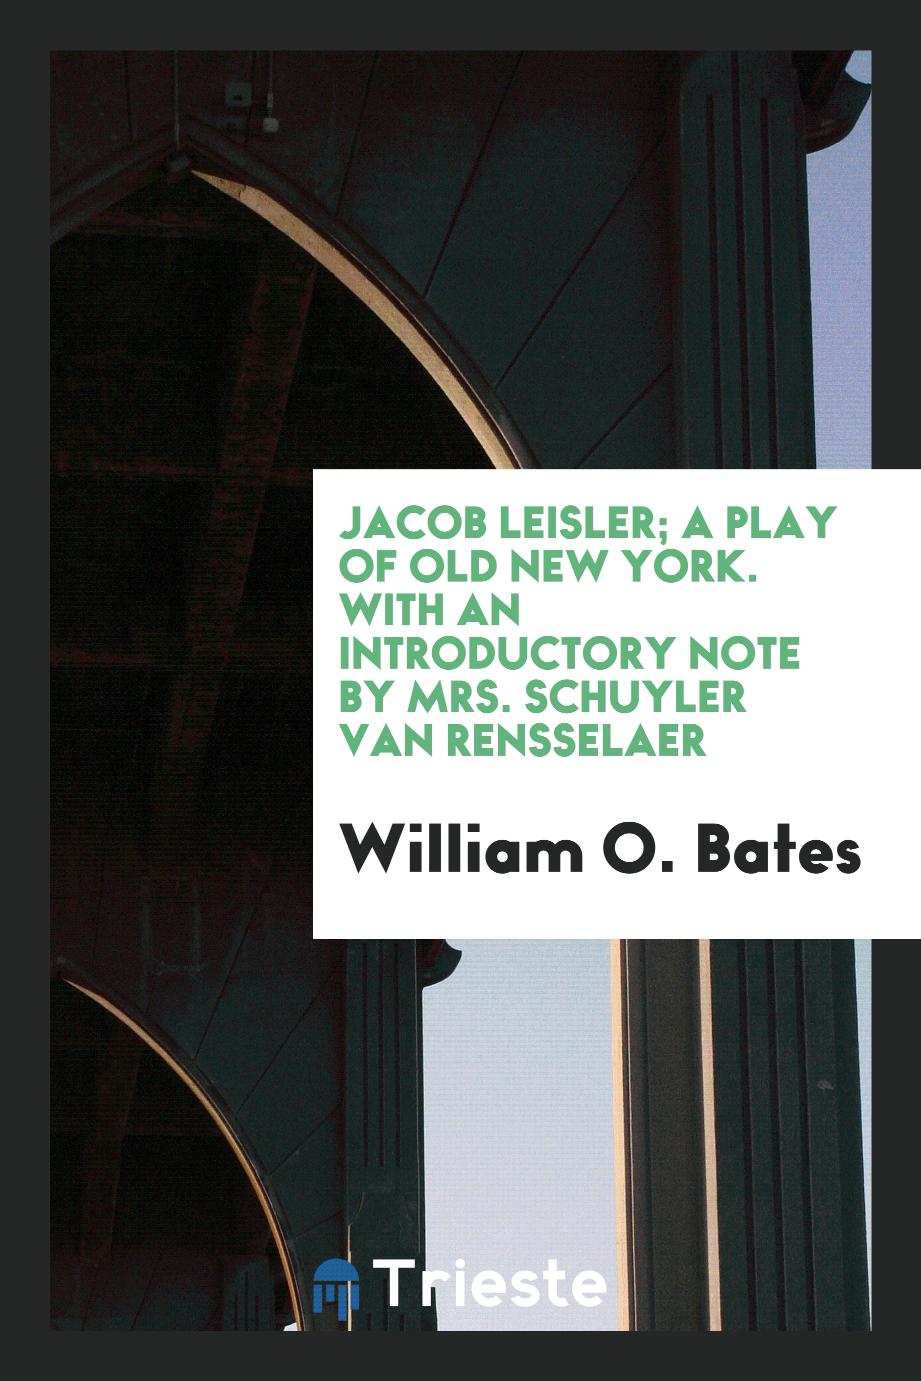 Jacob Leisler; A Play of Old New York. With an Introductory Note by Mrs. Schuyler Van Rensselaer